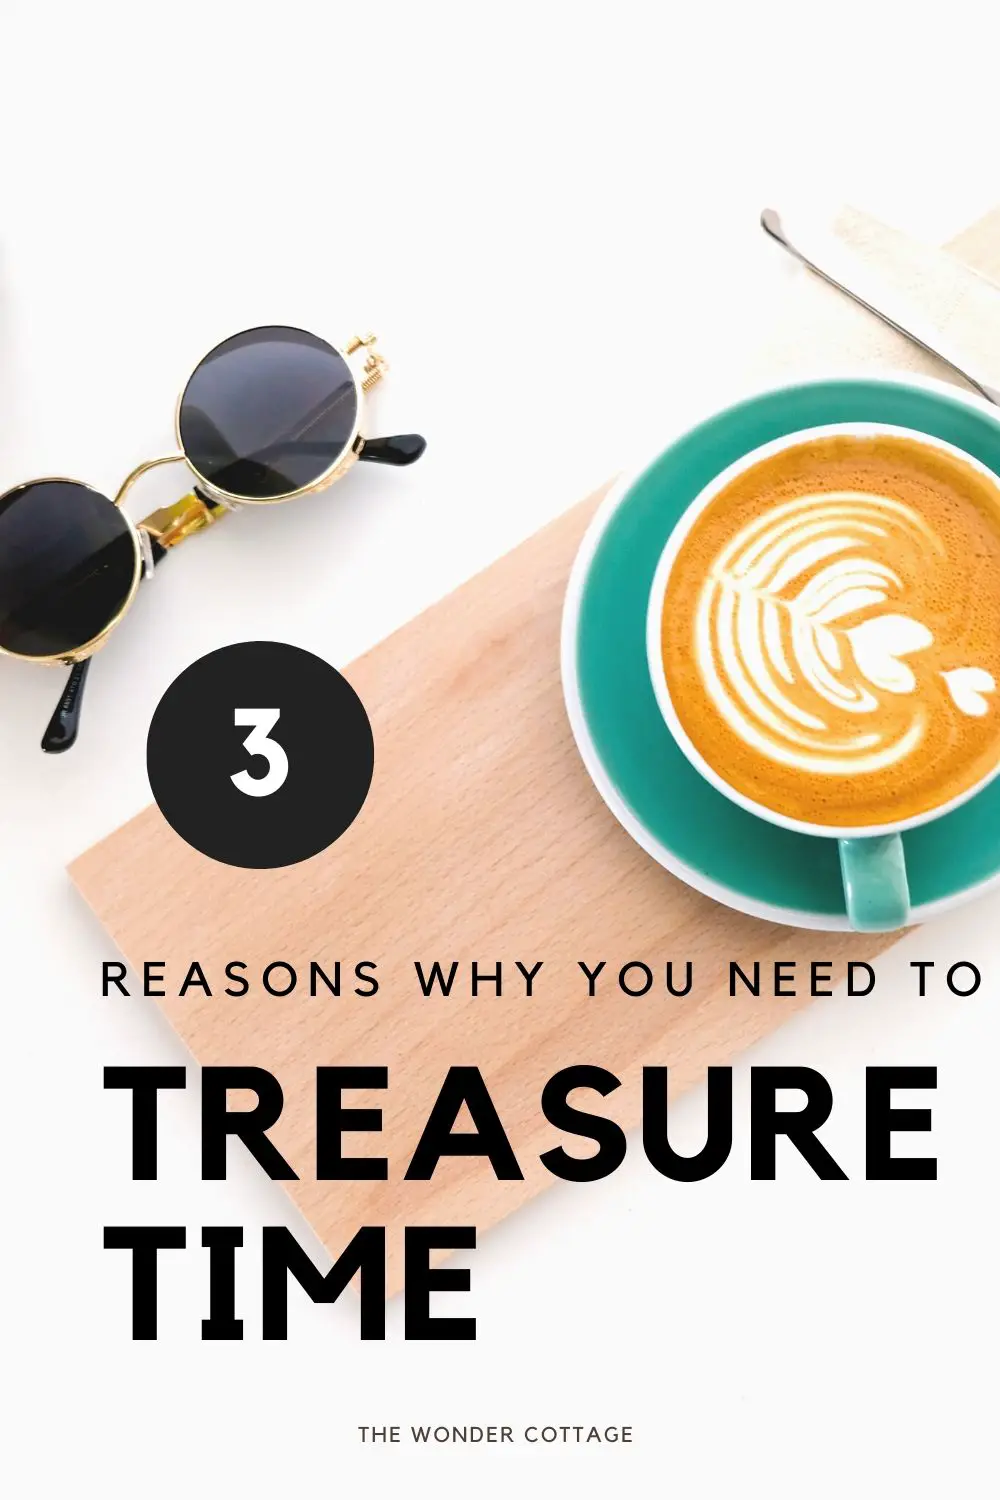 3 reasons why you need to treasure time